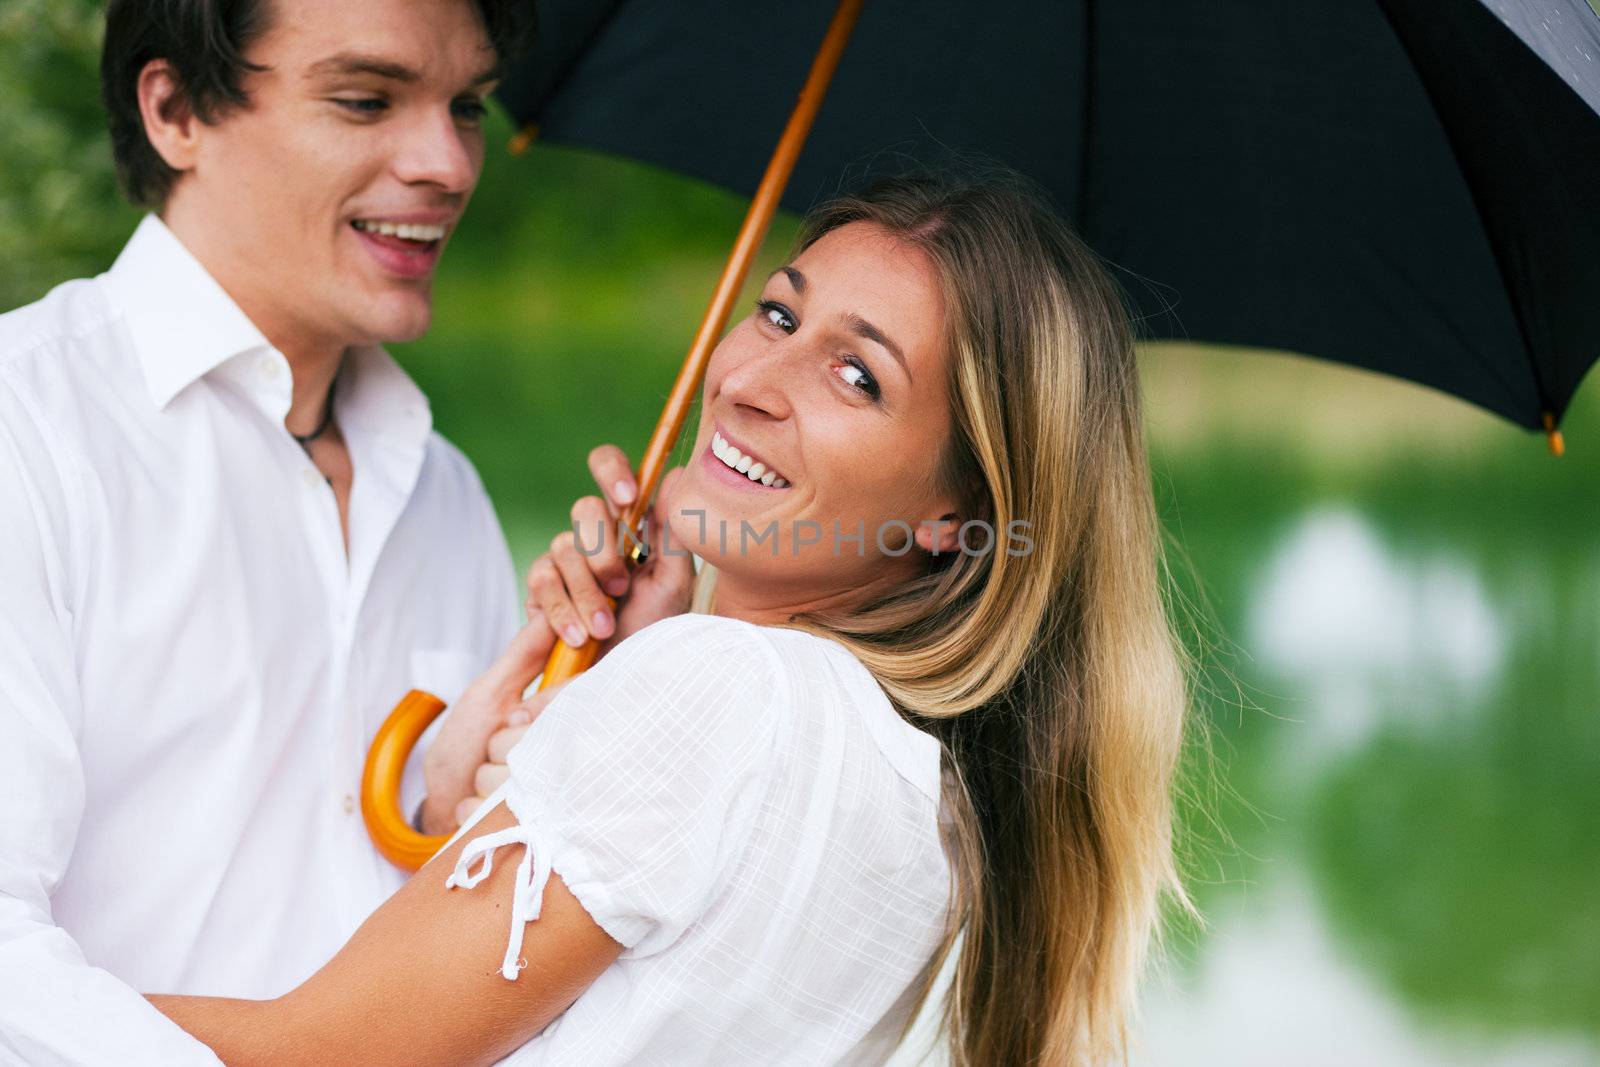 Couple (man and woman) at a lake in the summer rain with an umbrella, laughing and having fun despite of the bad weather